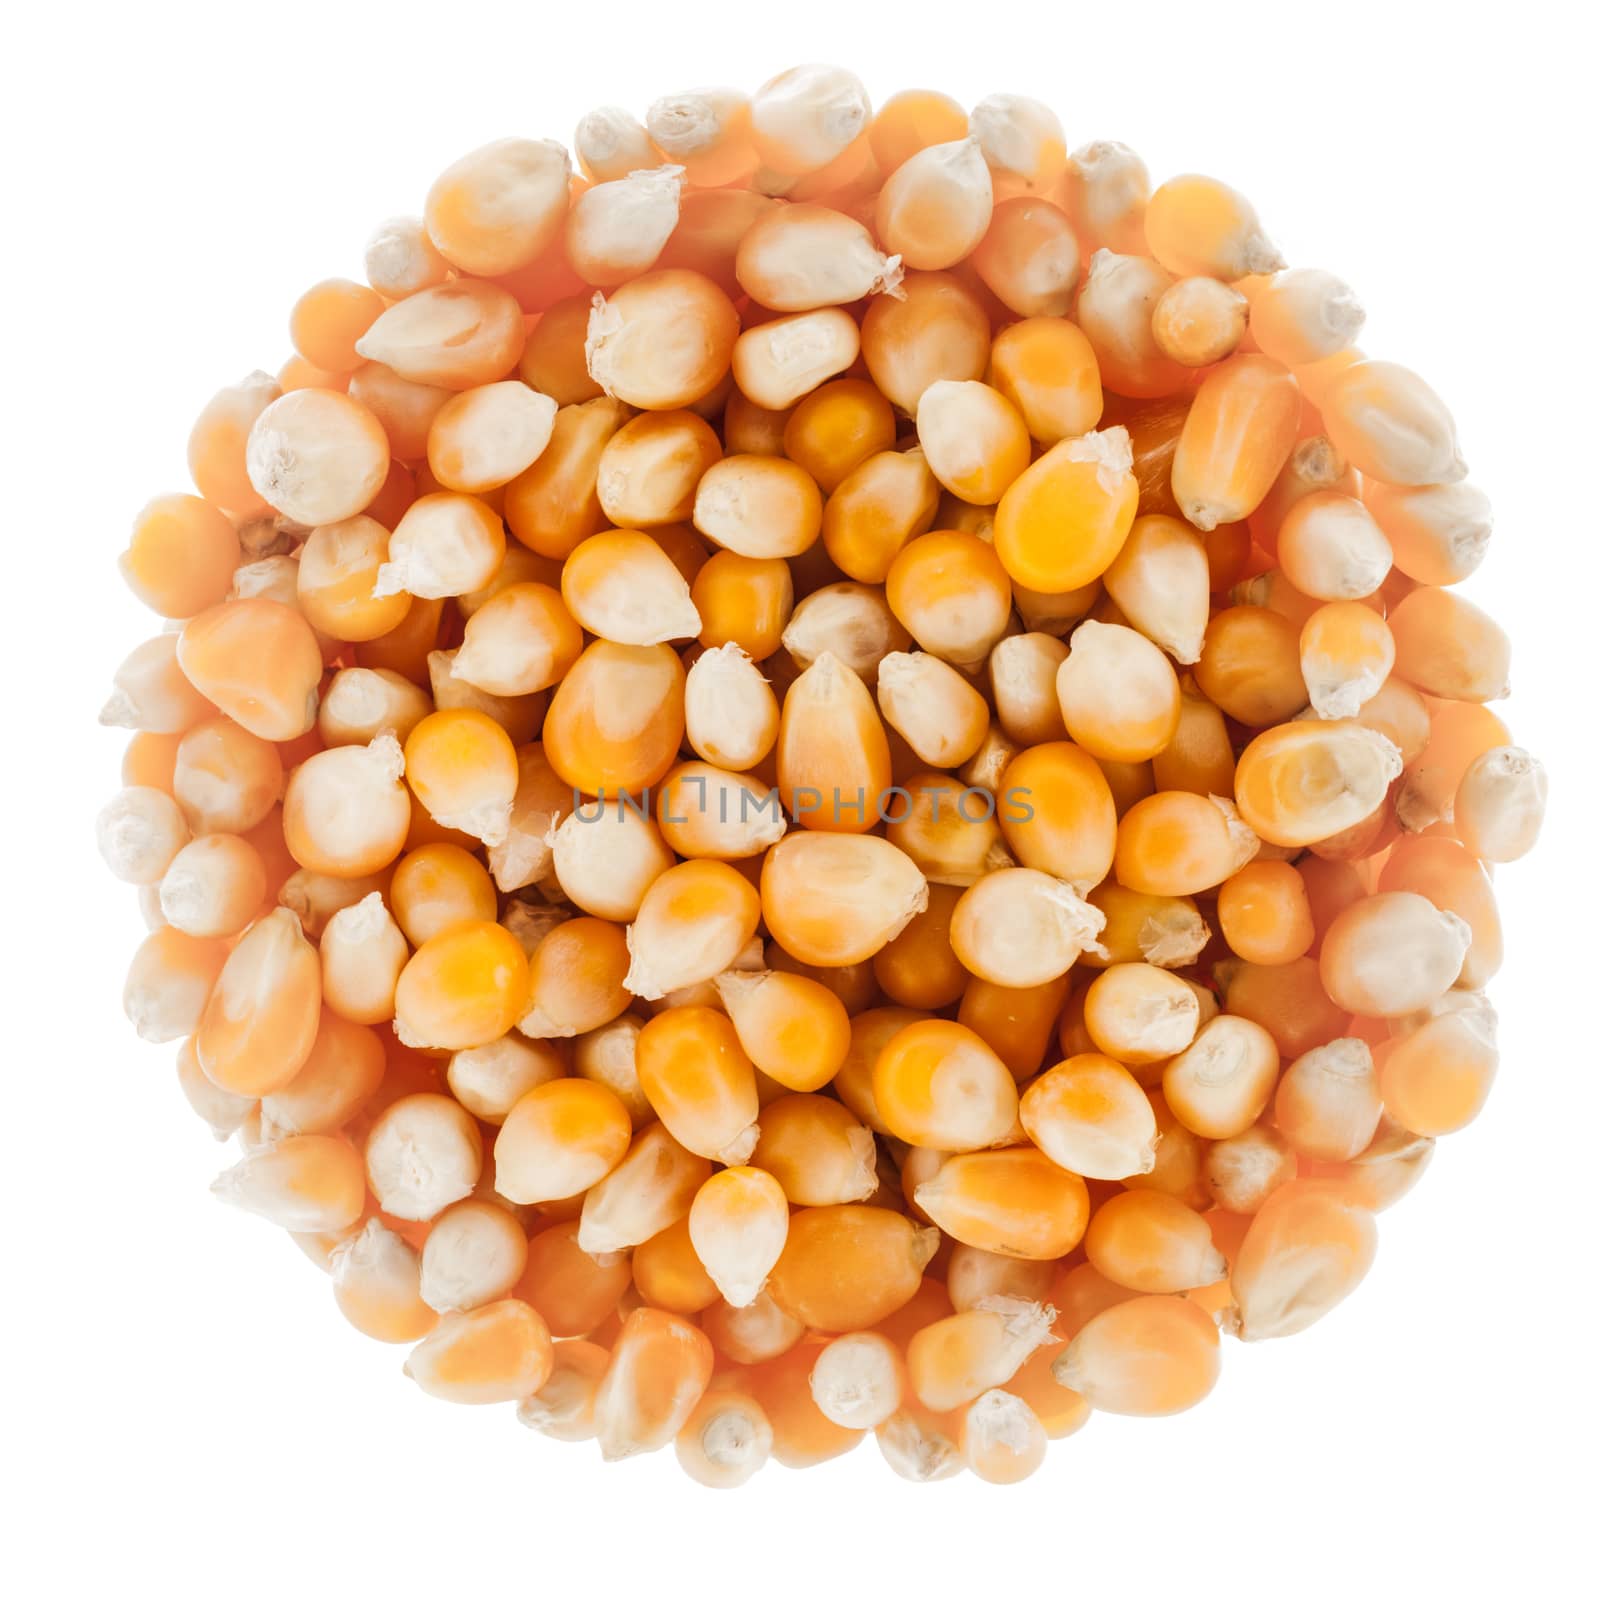 Perfect Circle of Corn Seeds Isolated on White by aetb